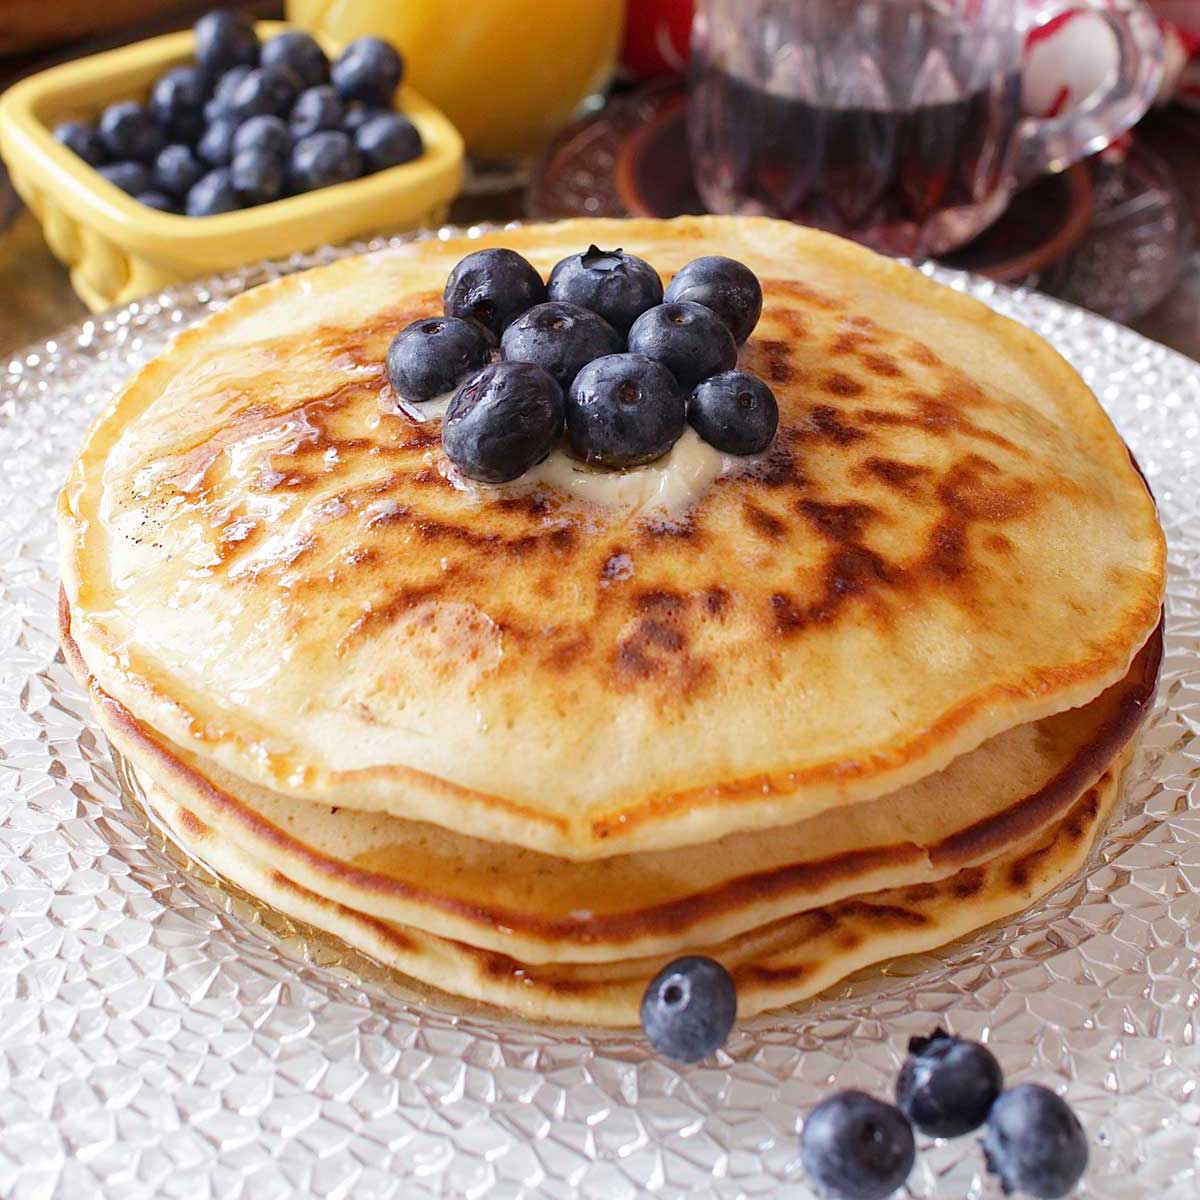 Share 45 kuva easy pancake recipe for one person